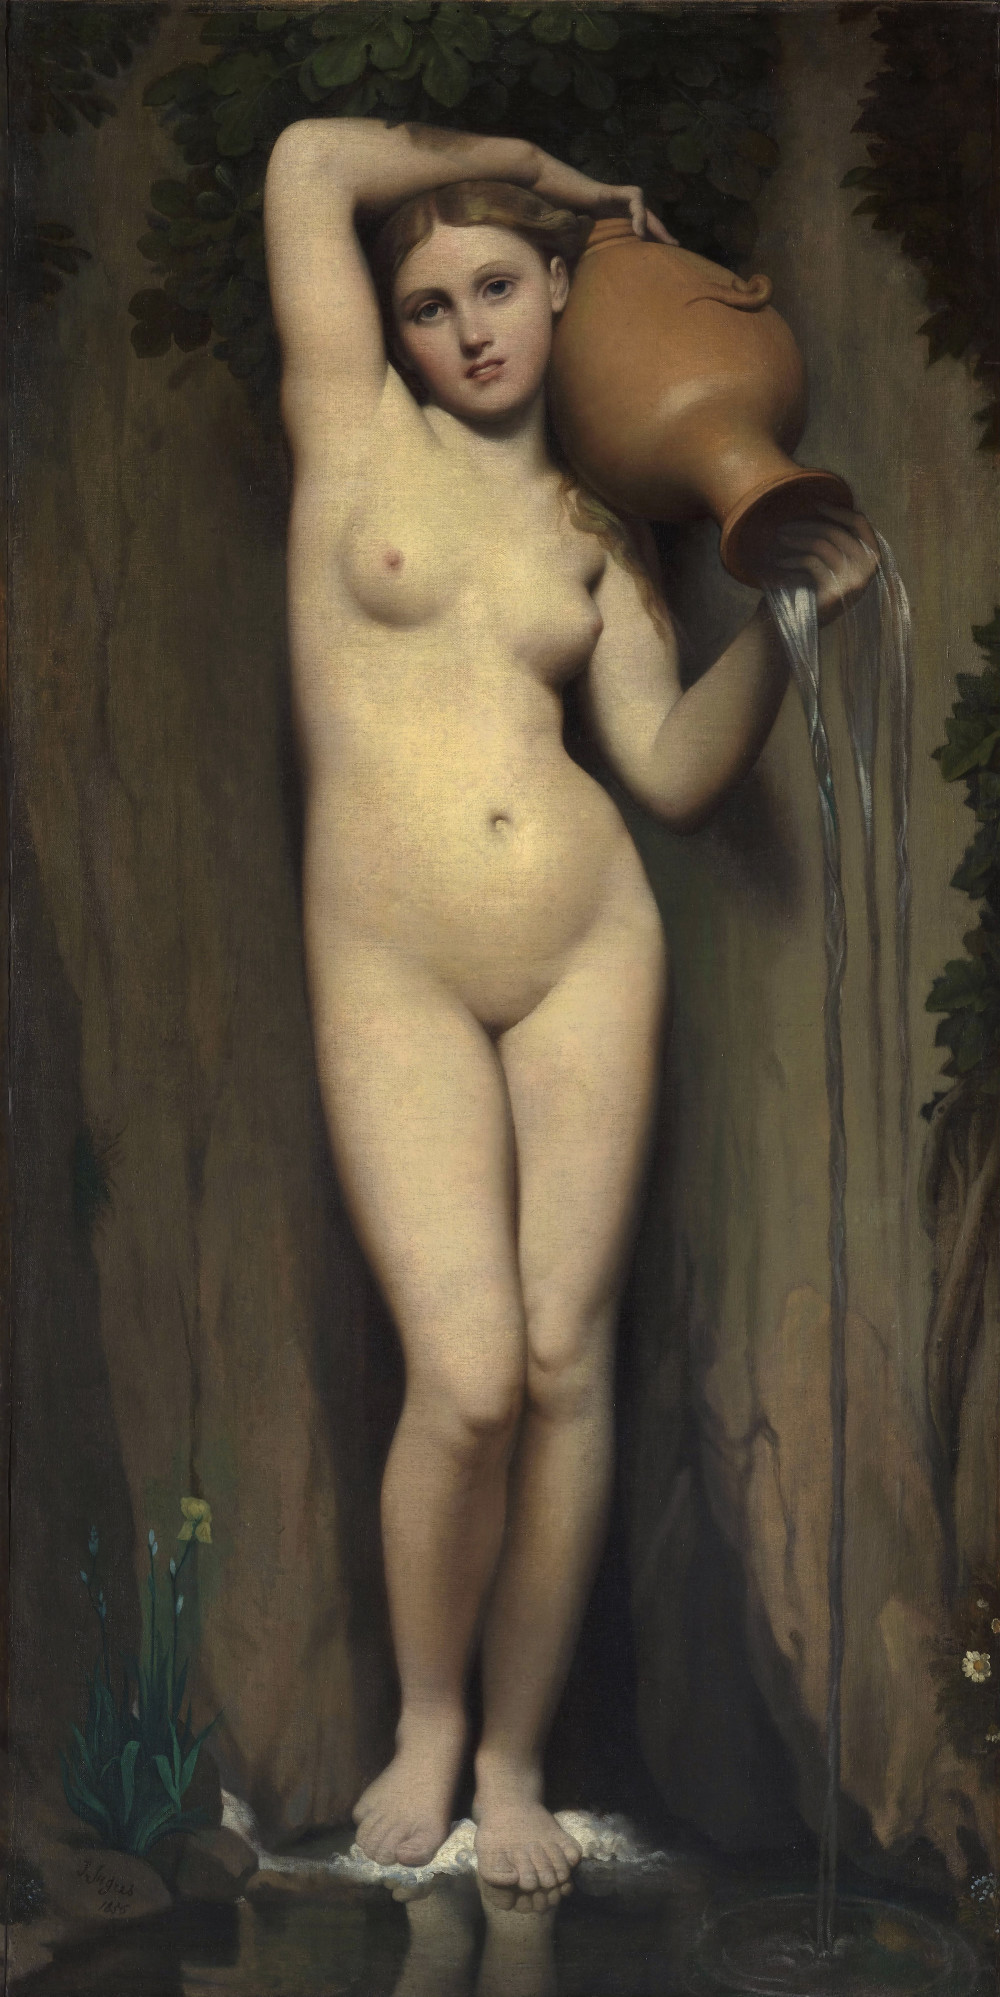 The Spring by Jean-Auguste-Dominique Ingres - 1820 - 1856 - 80 x 163 cm Musée d'Orsay